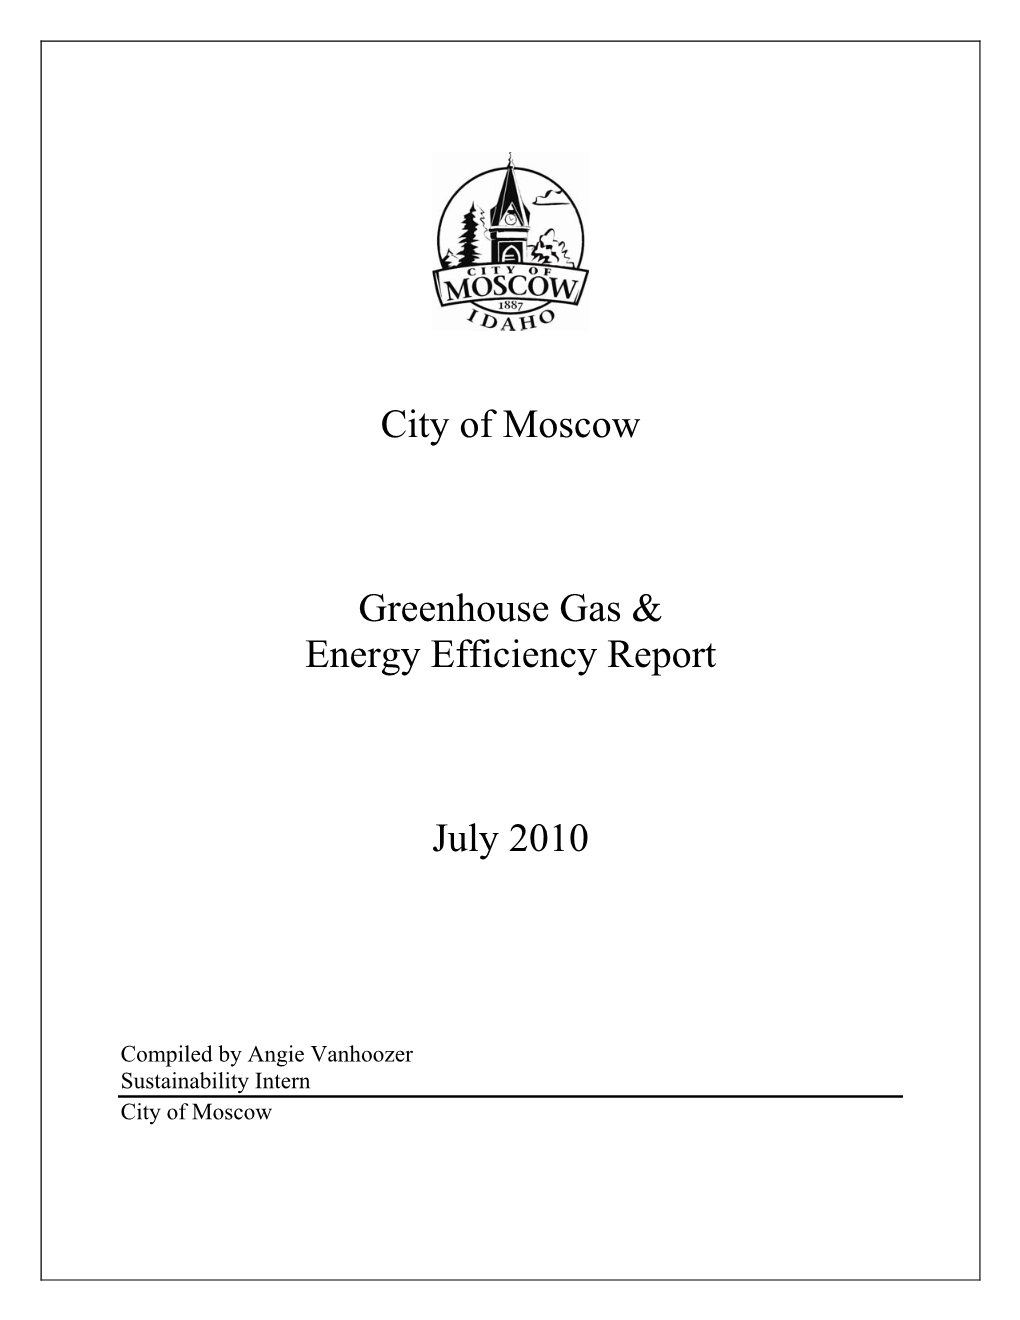 City of Moscow Greenhouse Gas & Energy Efficiency Report July 2010